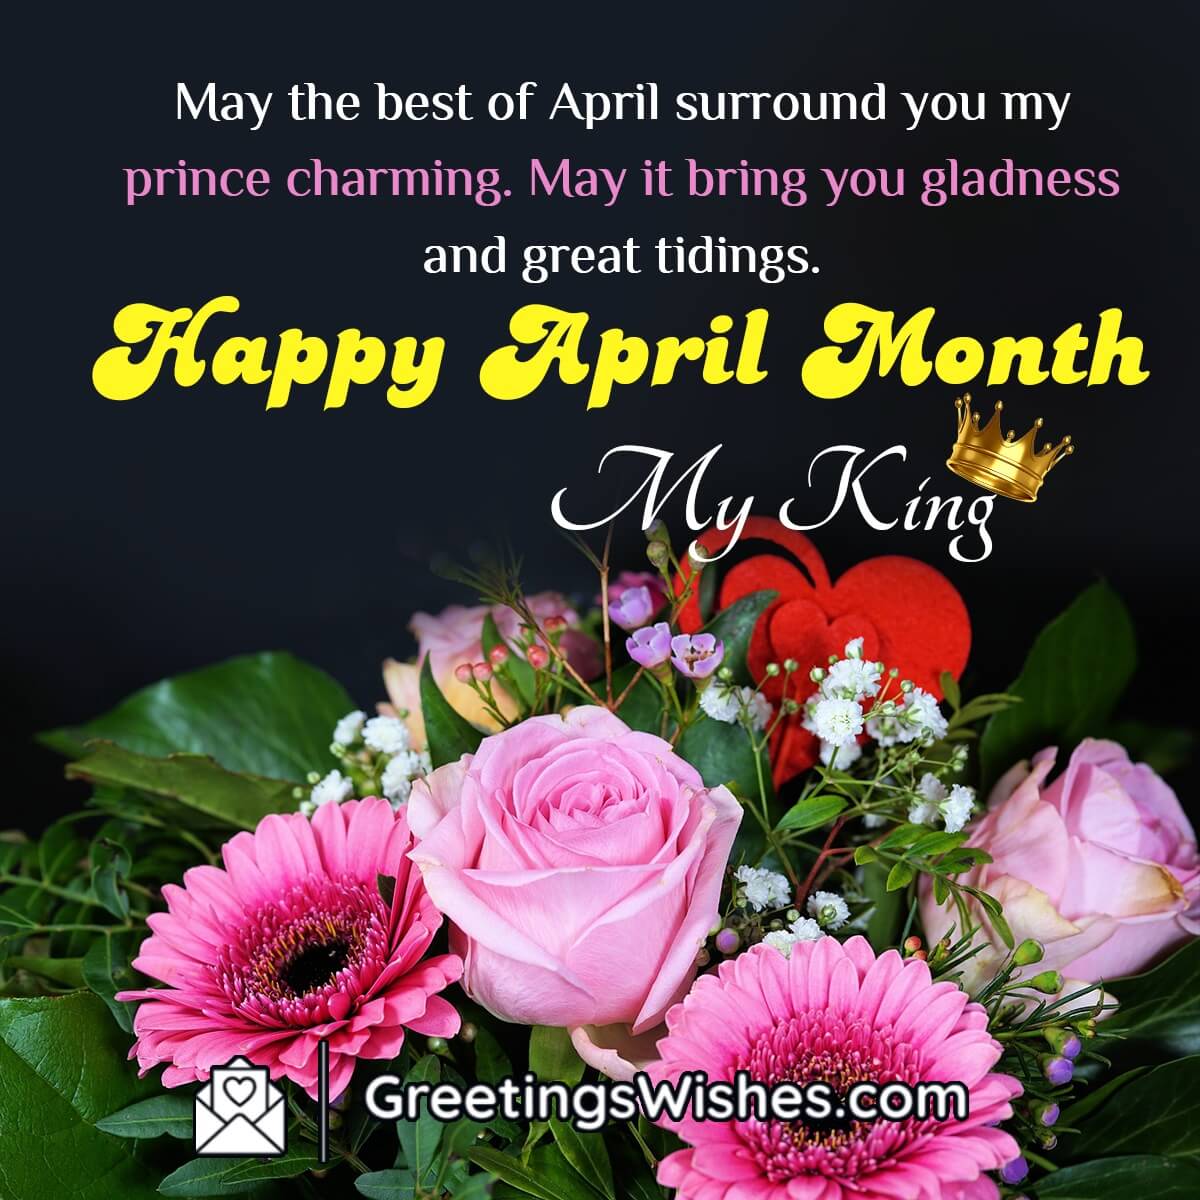 Happy April Month Wishes